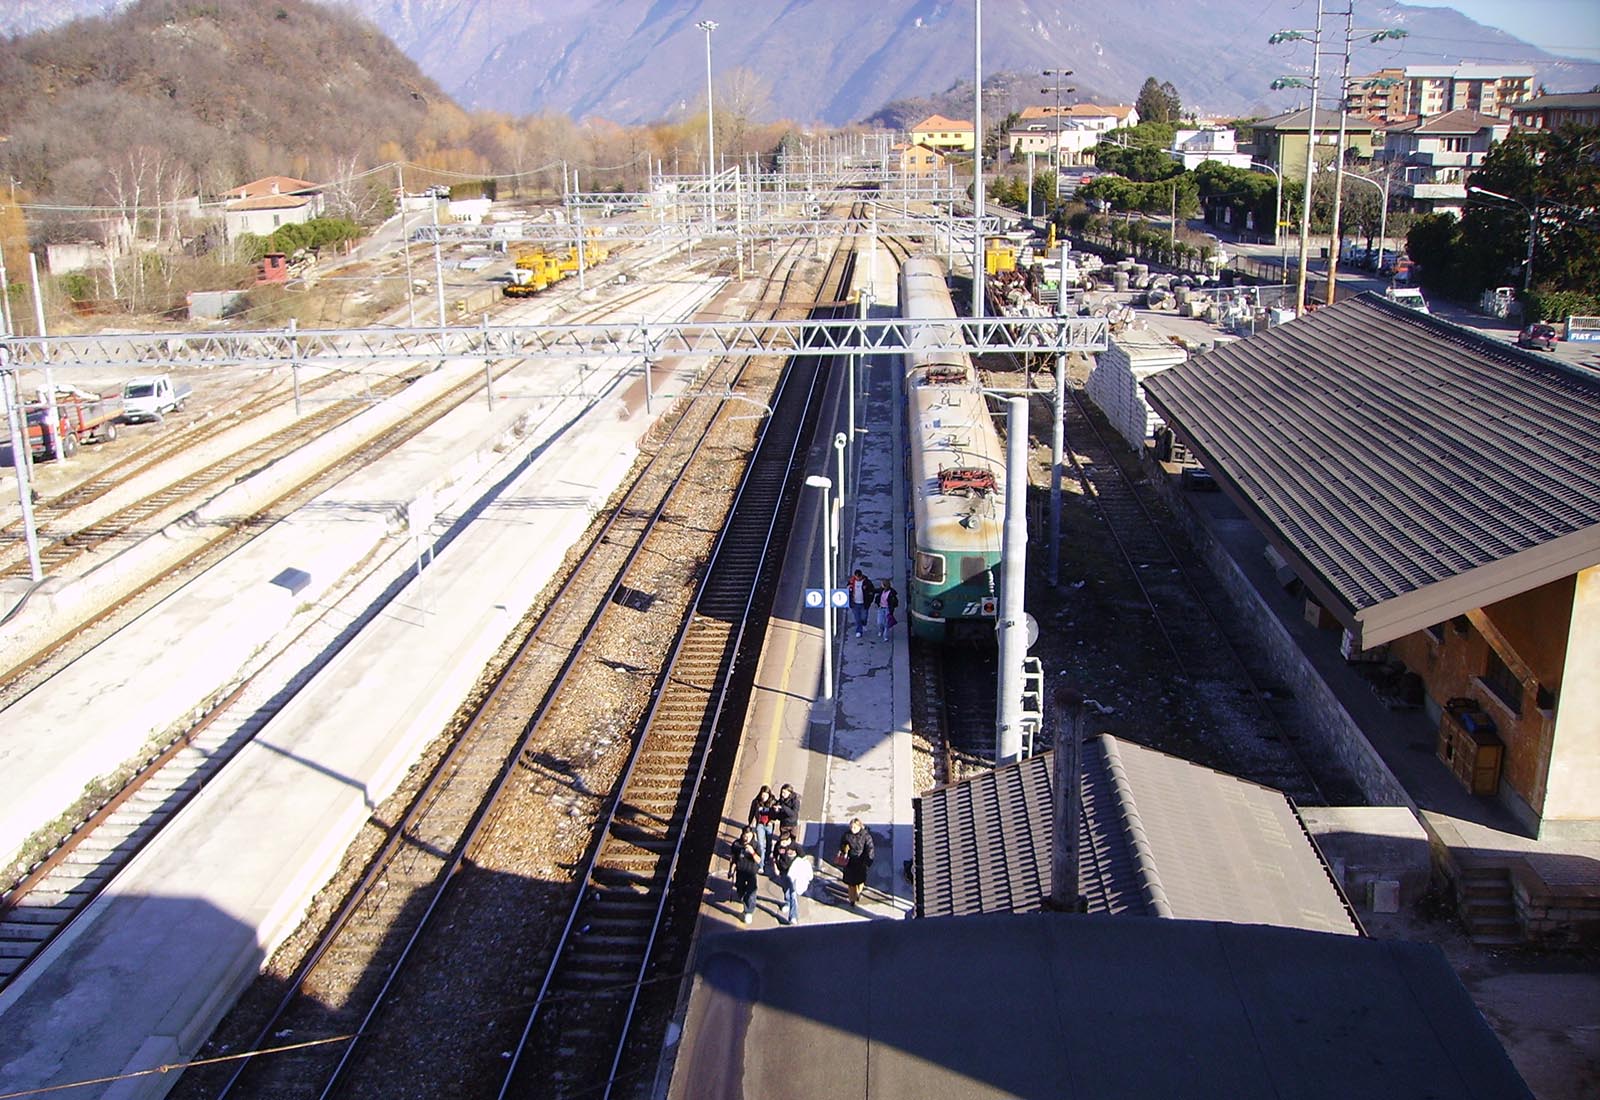 Extinguishing systems of railway stations - The Colico railway station